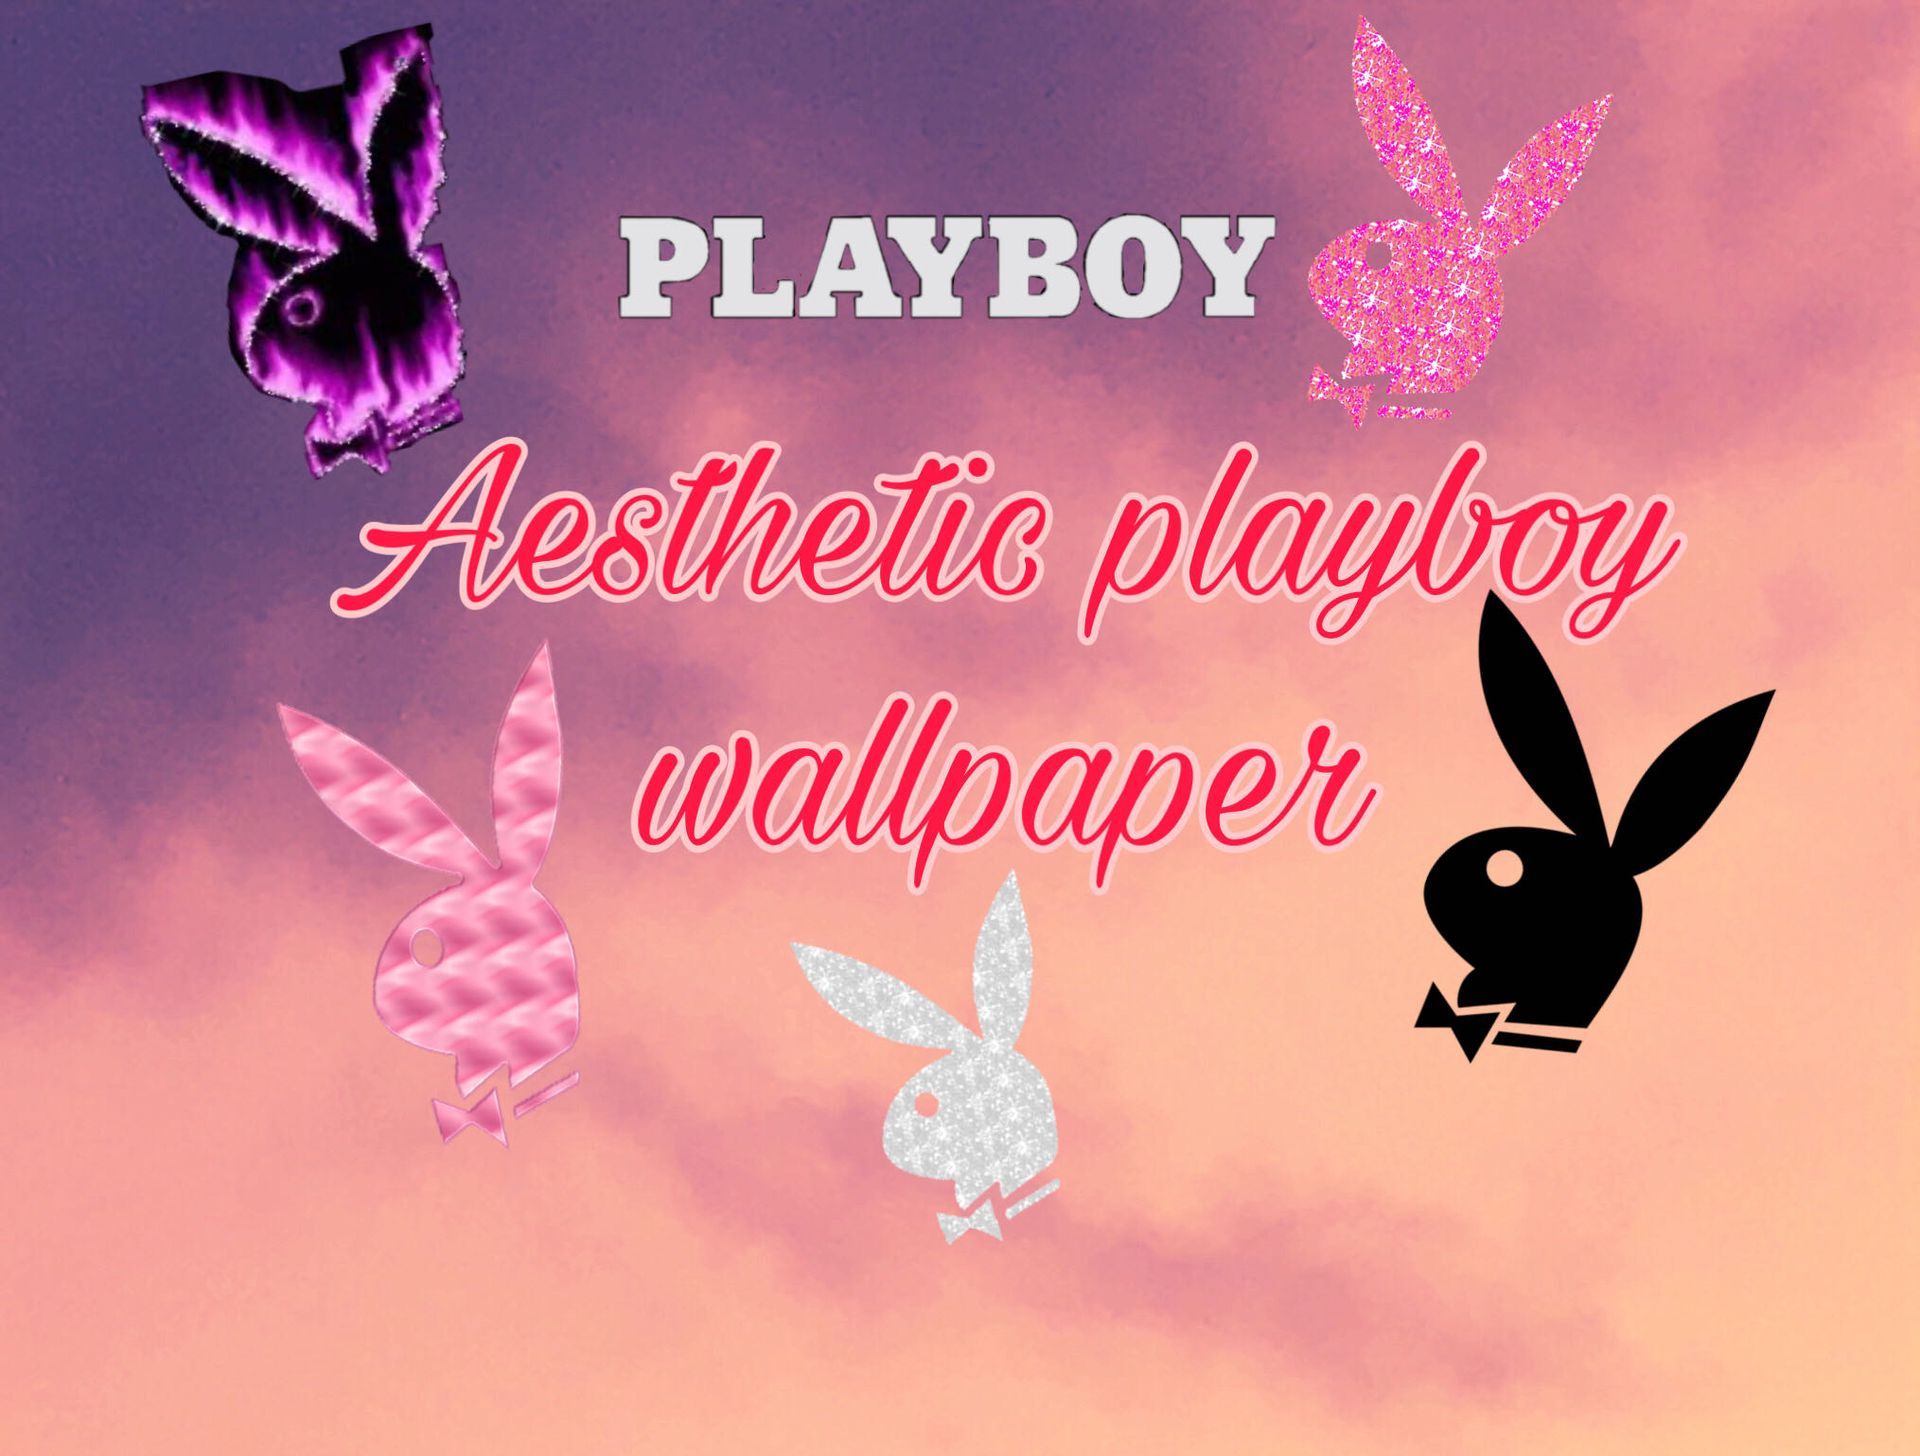 $$ Playboy wallpapers $$